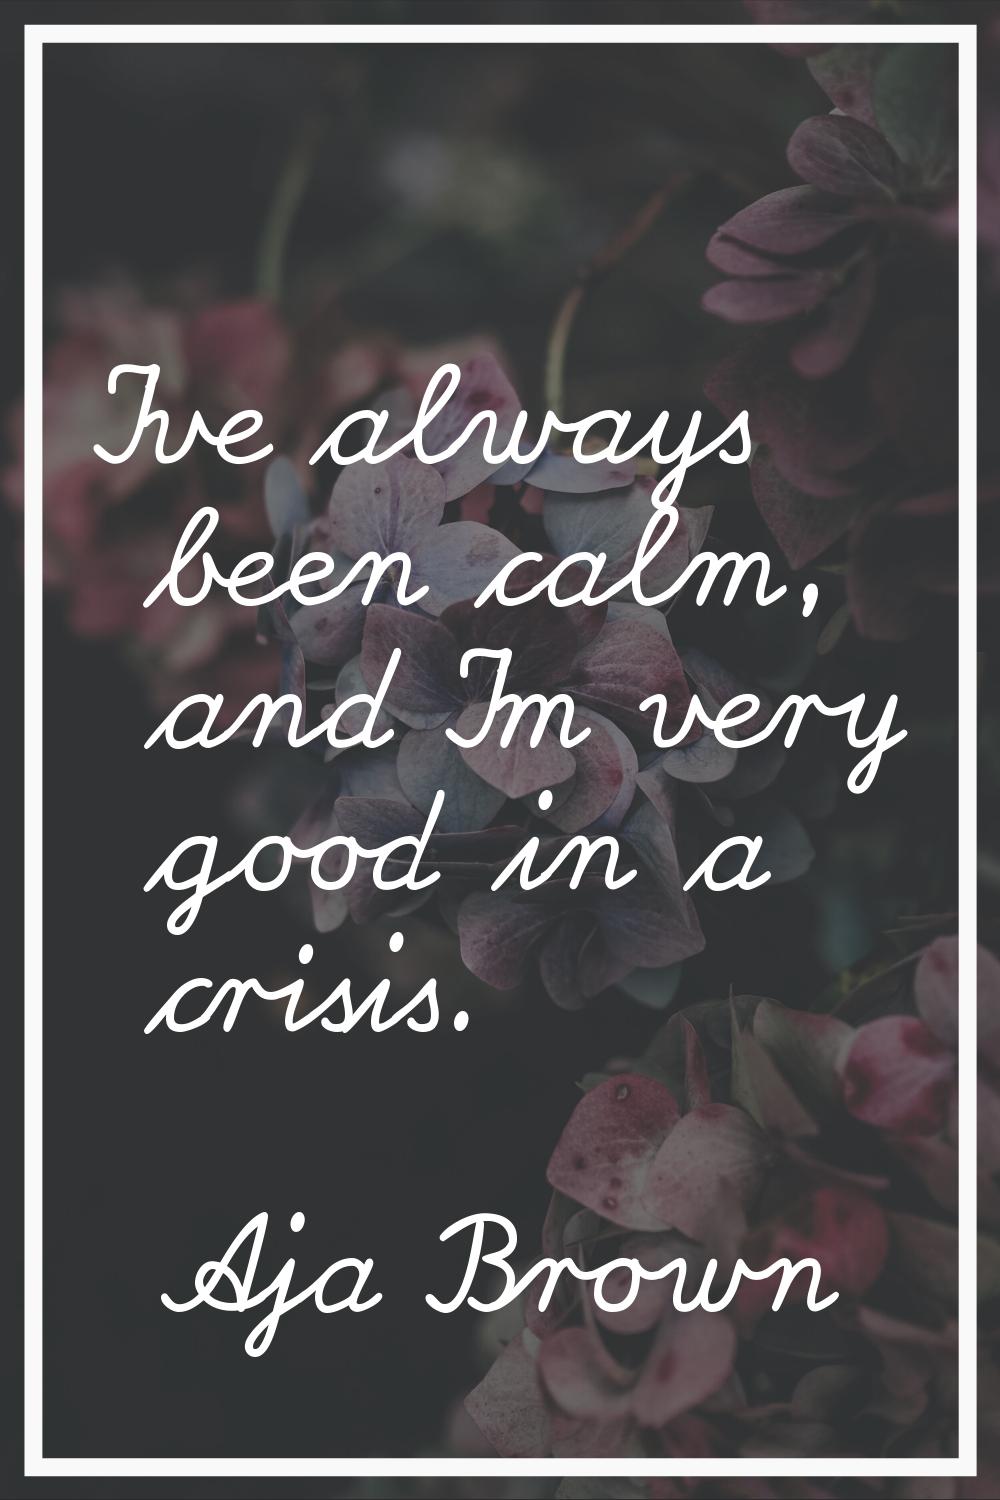 I've always been calm, and I'm very good in a crisis.